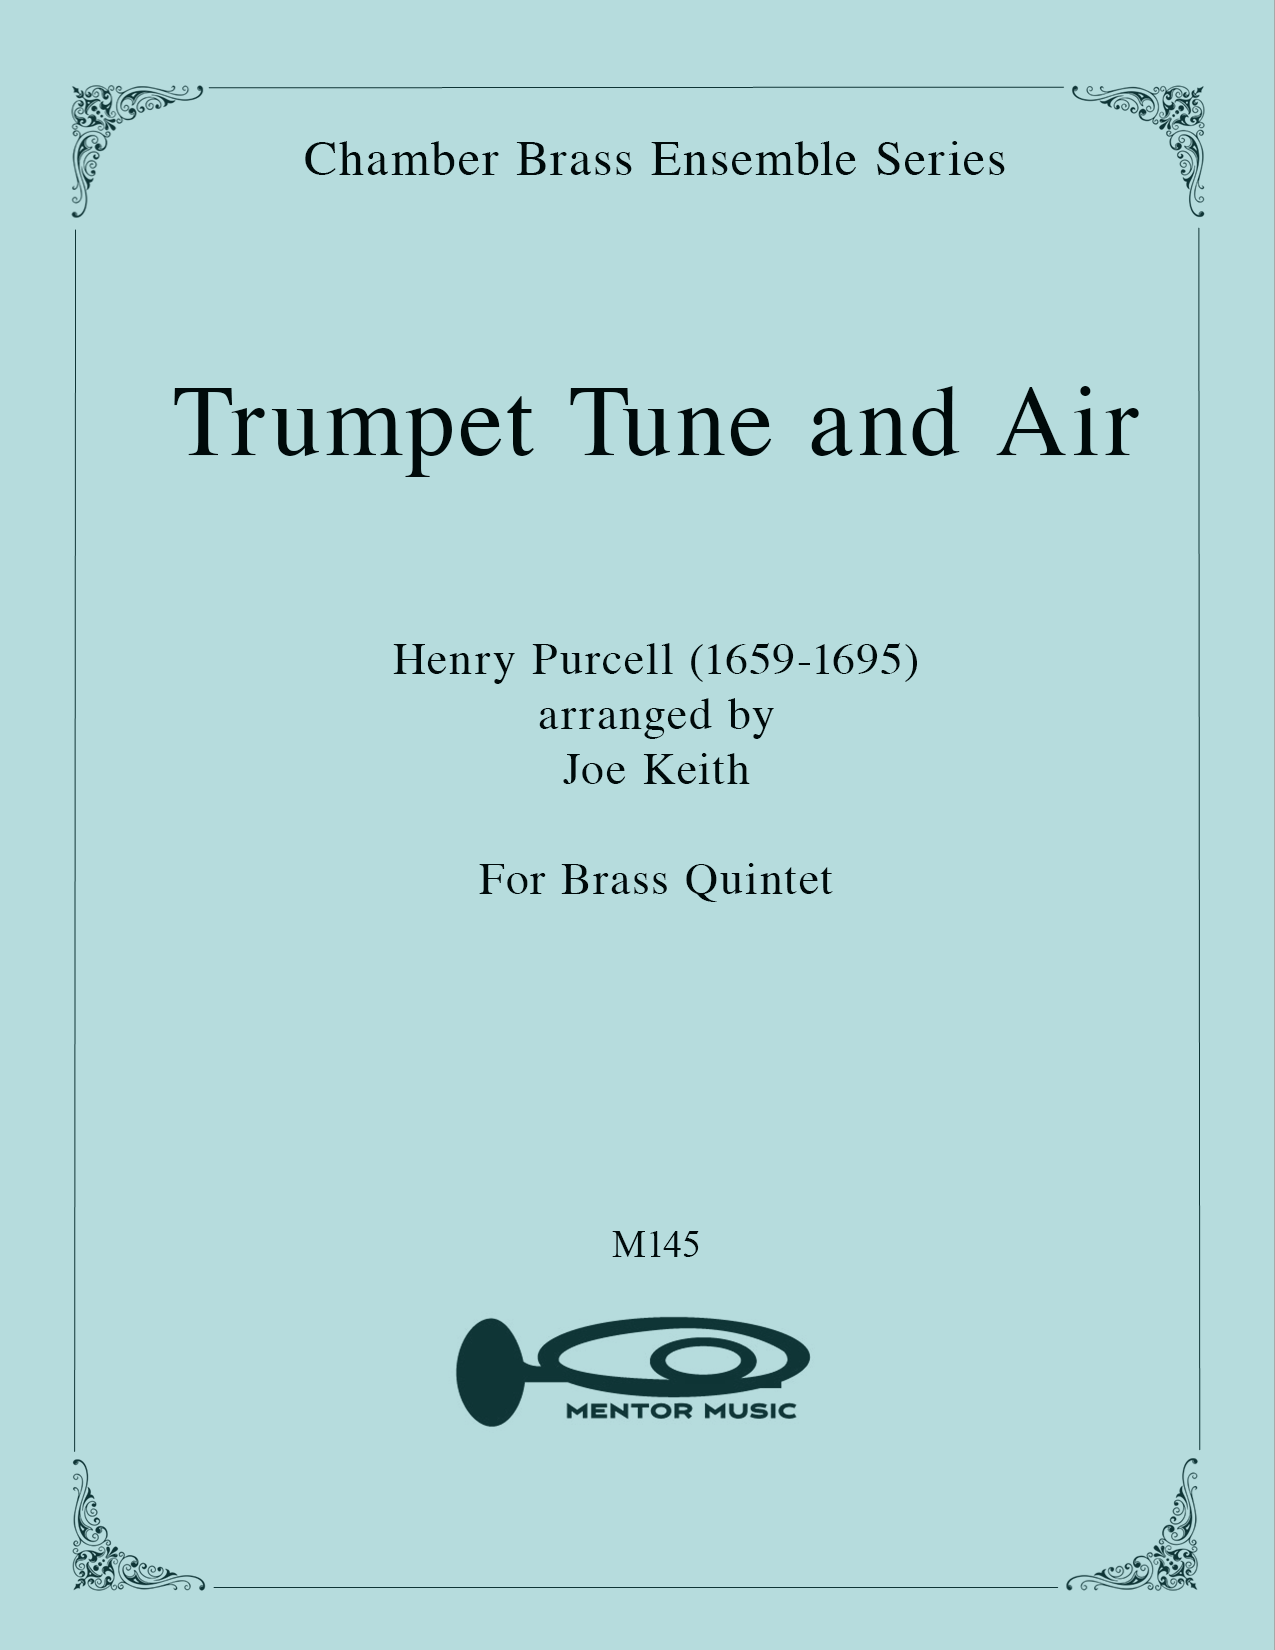 Trumpet Tune and Air for Brass Quintet